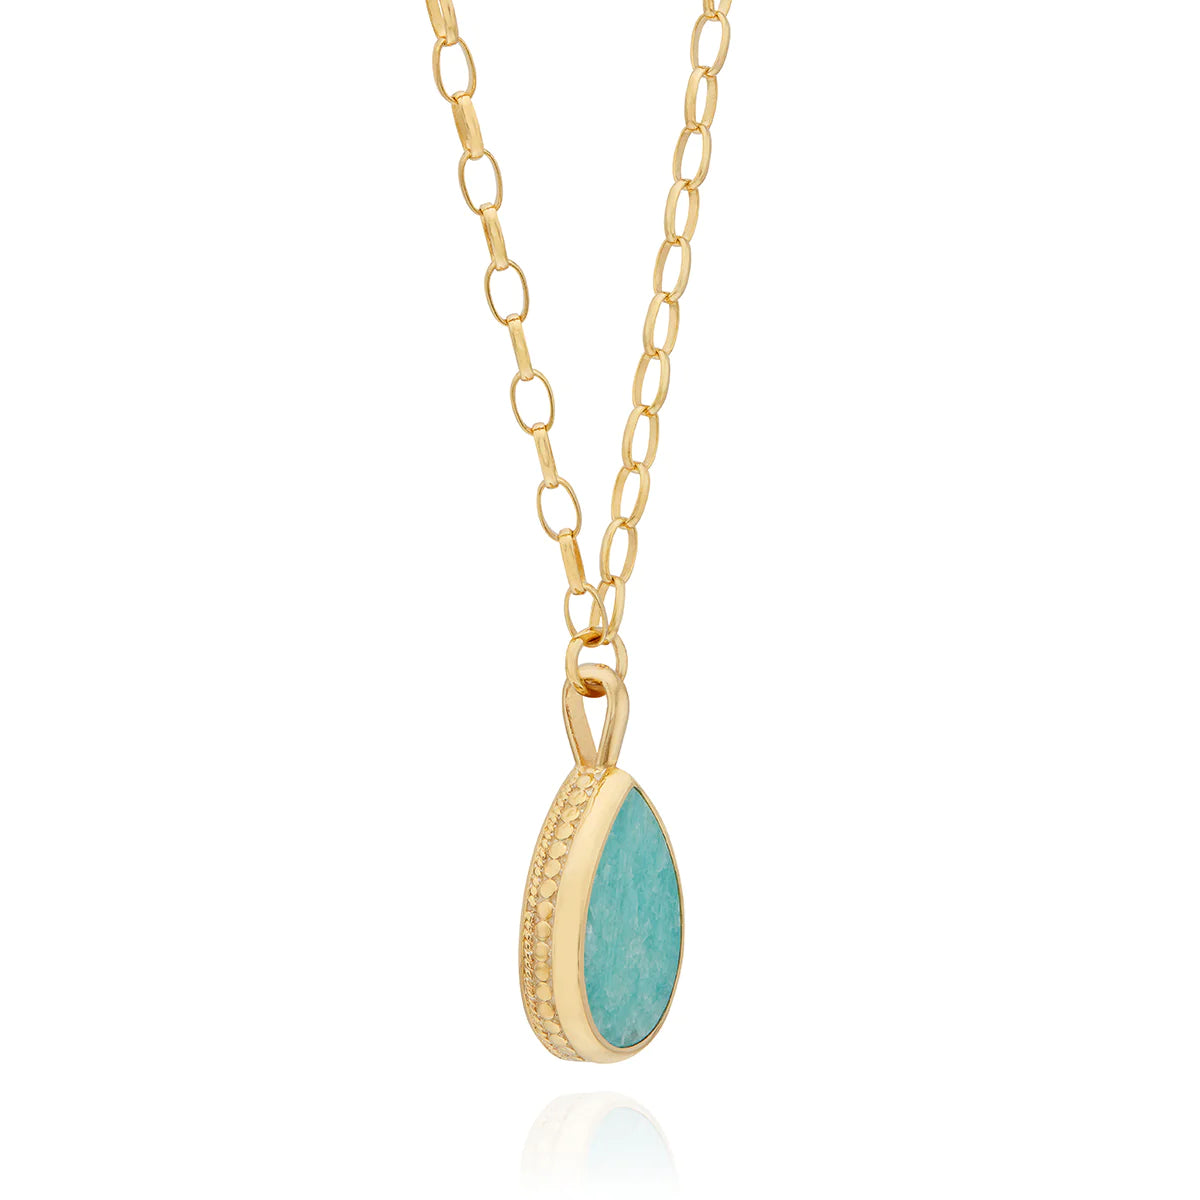 Large amazonite teardrop pendant necklace on gold chain